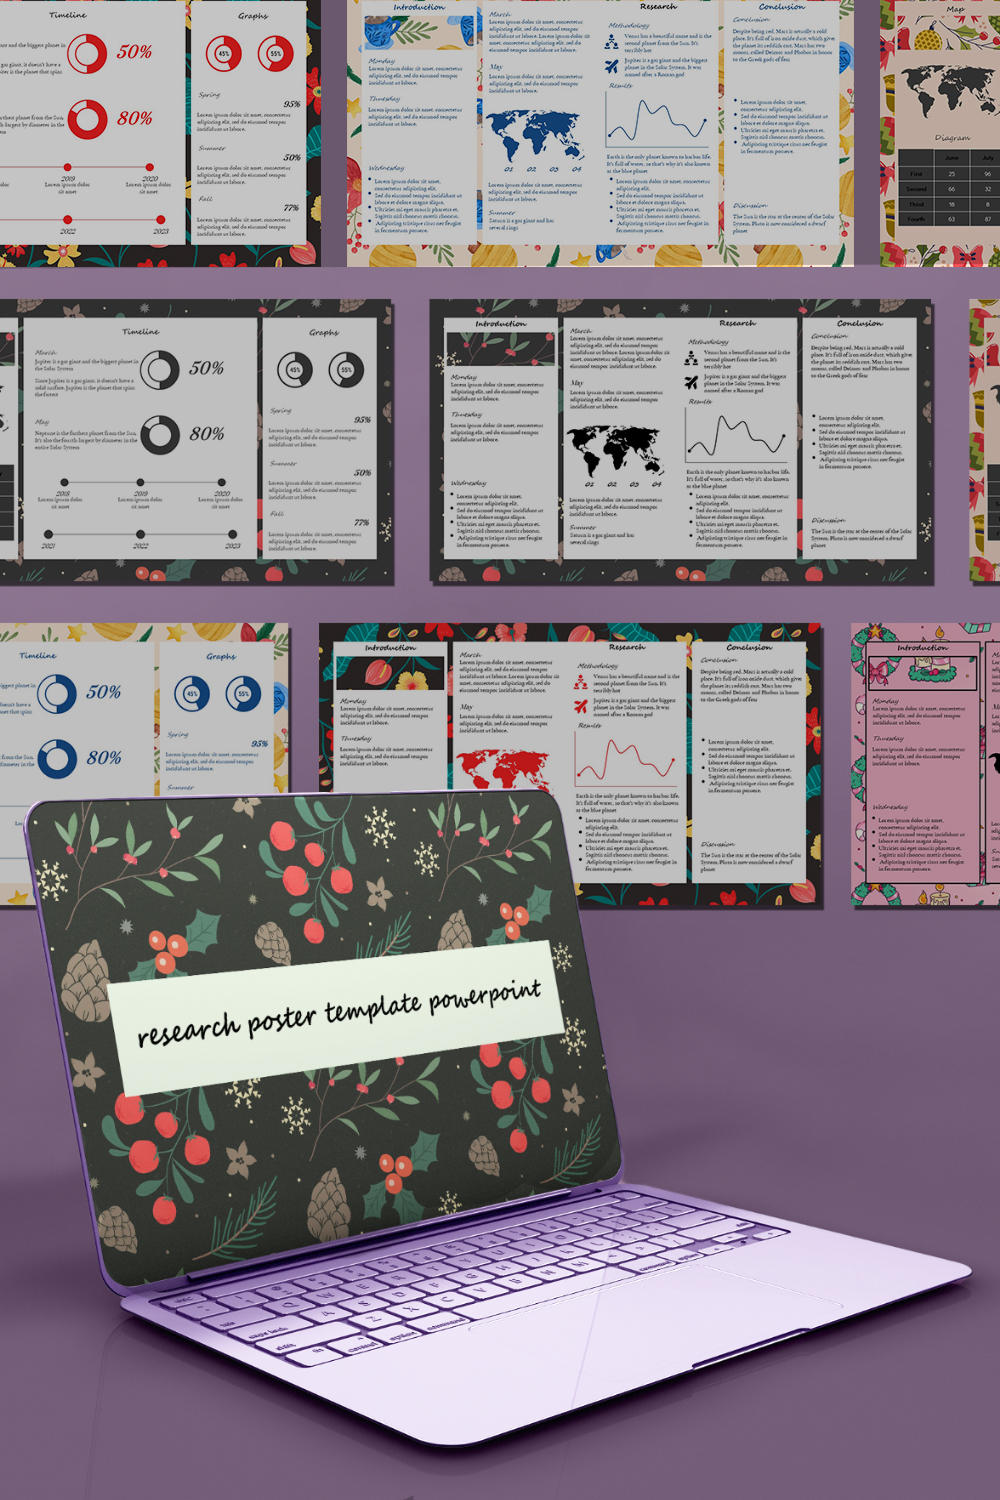 Illustrations research poster template powerpoint of pinterest.